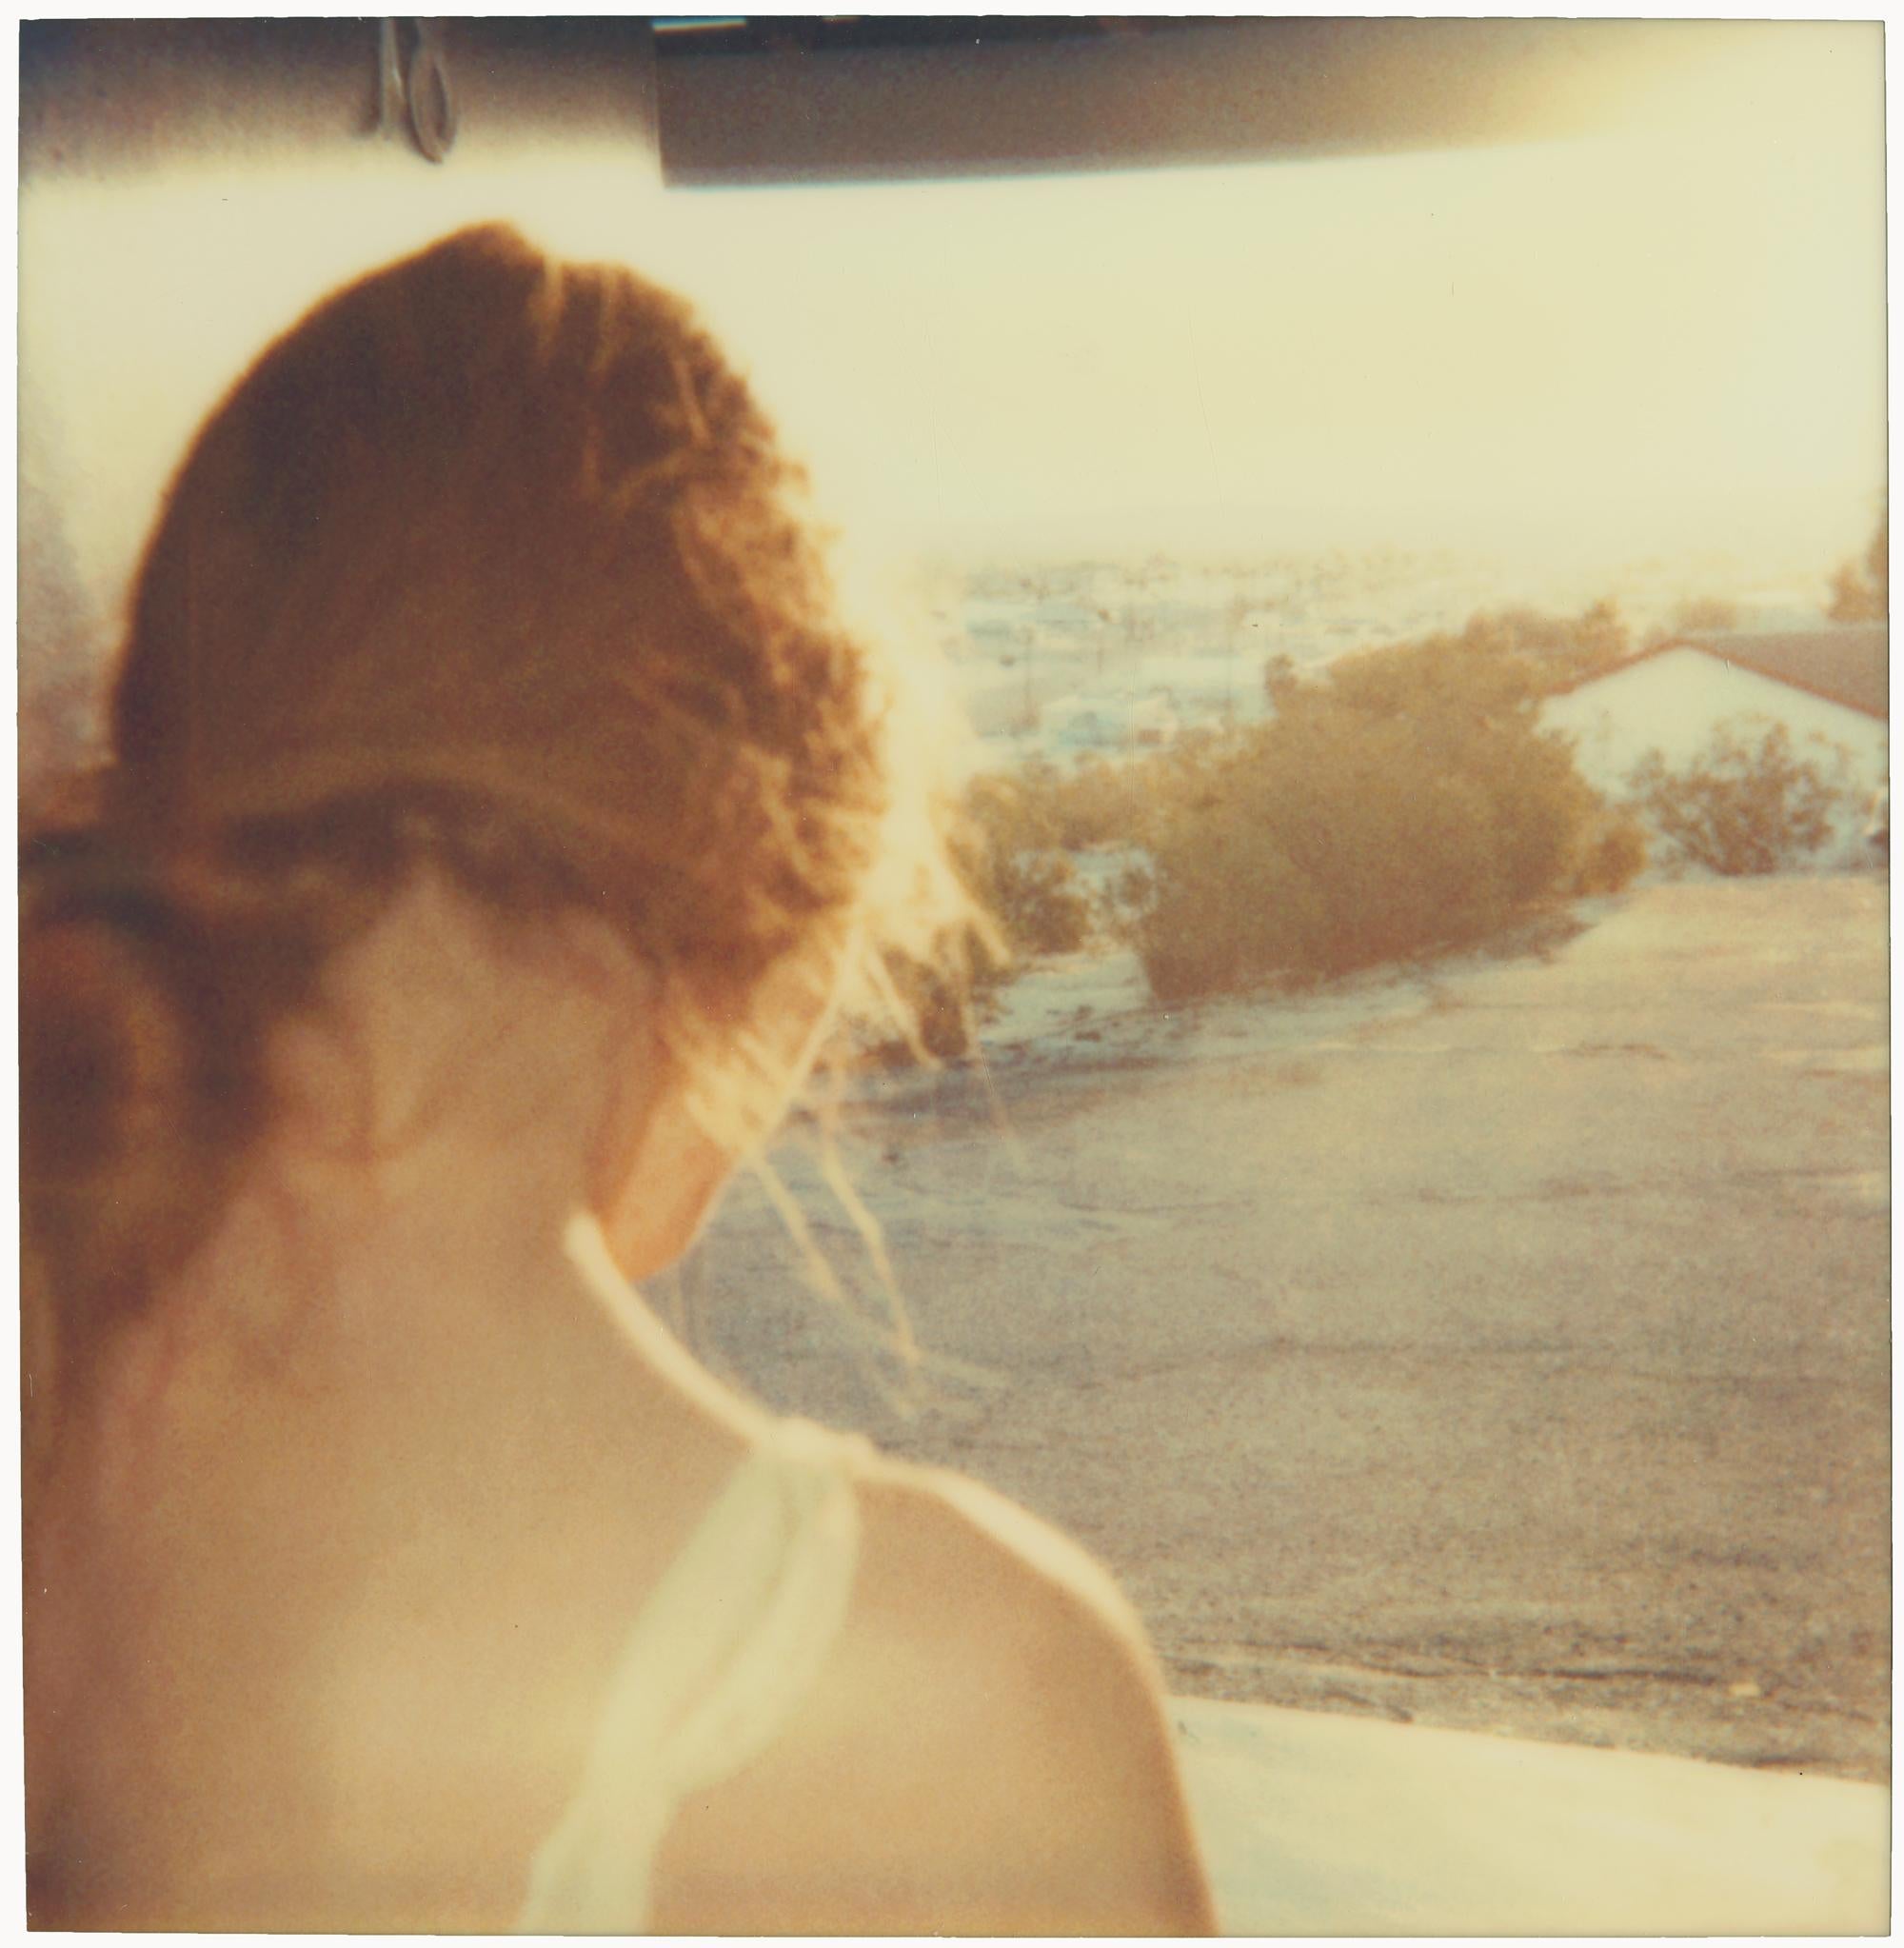 Hillview Motel (Last Picture Show) - analog, mounted, based on 3 Polaroids - Photograph by Stefanie Schneider